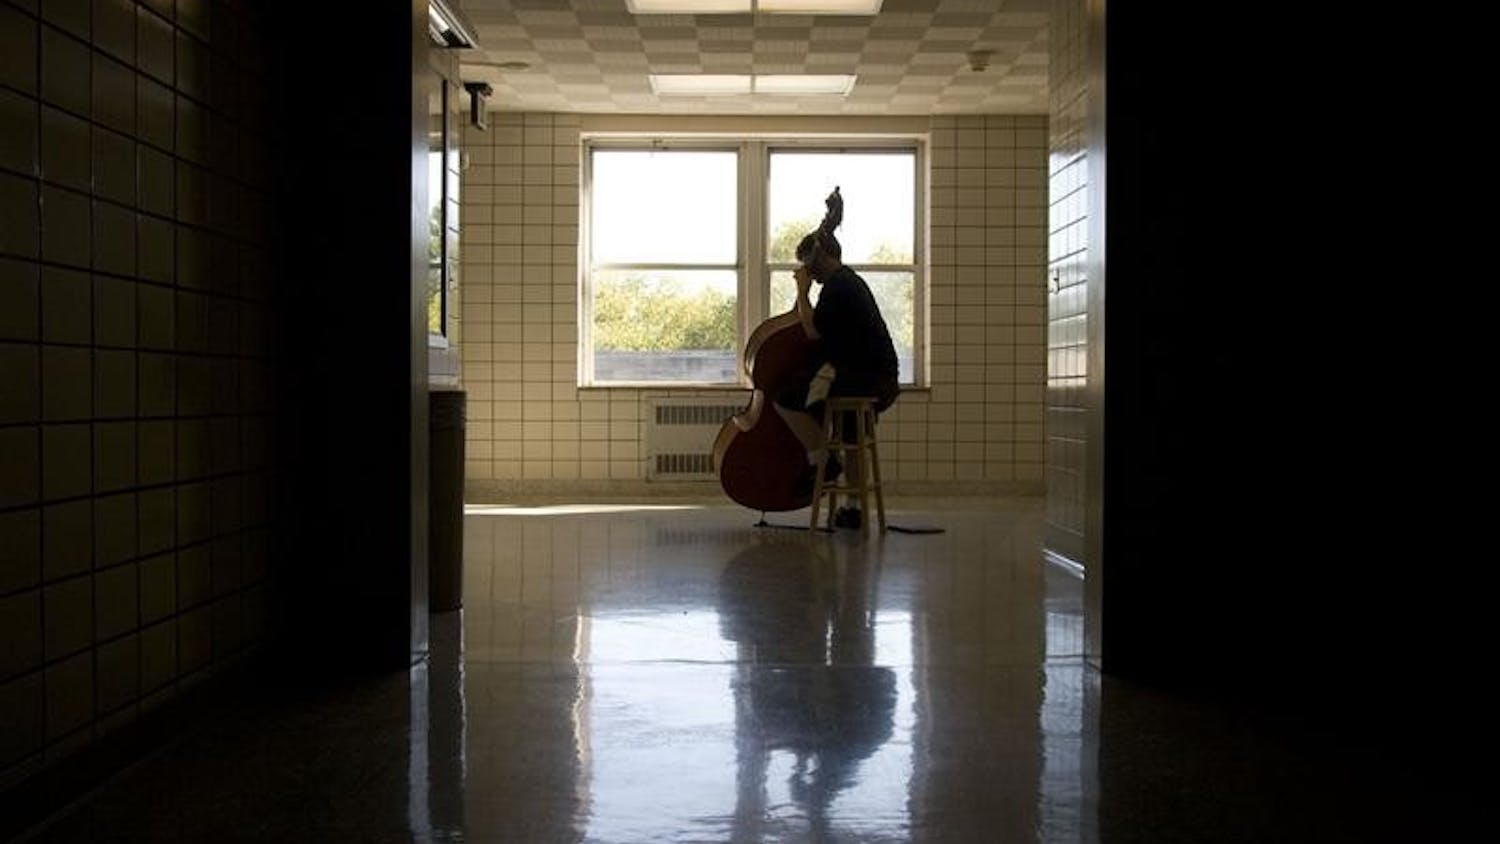 Graduate student Noah Reitman practices his double bass, which is one octave lower than a cello, Wednesday in the Jacobs School of Music.  Reitman's double bass was made in Mirecourt, France 150 years ago.  